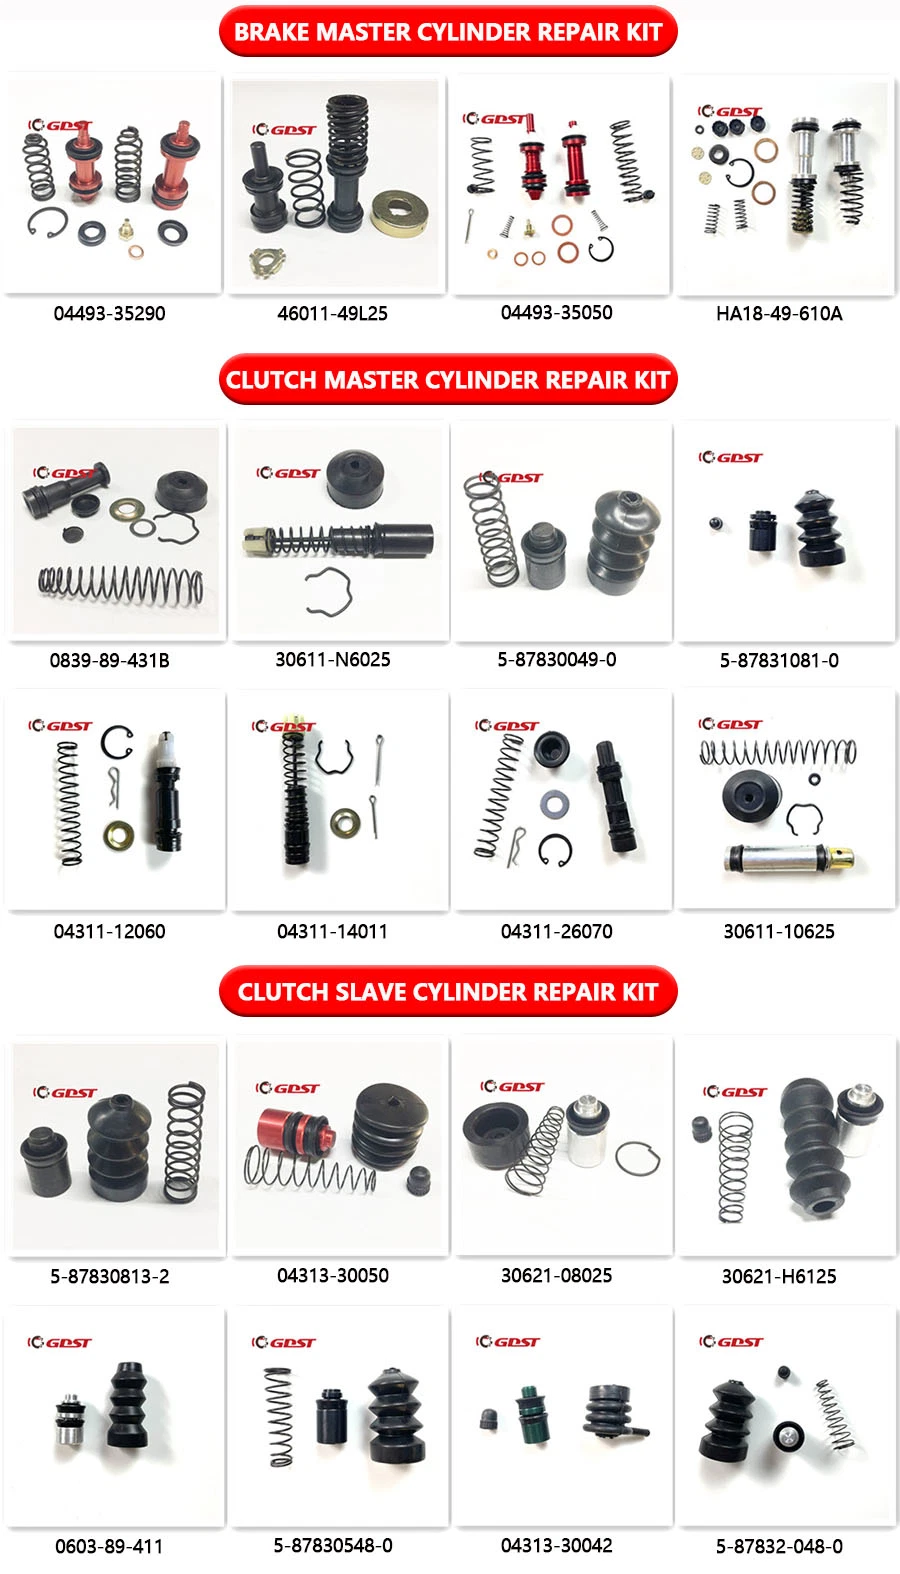 GDST Factory Supply Spare Parts 5-87830813-2 5878308132 Clutch Slave Cylinder Repair Kit for Trooper